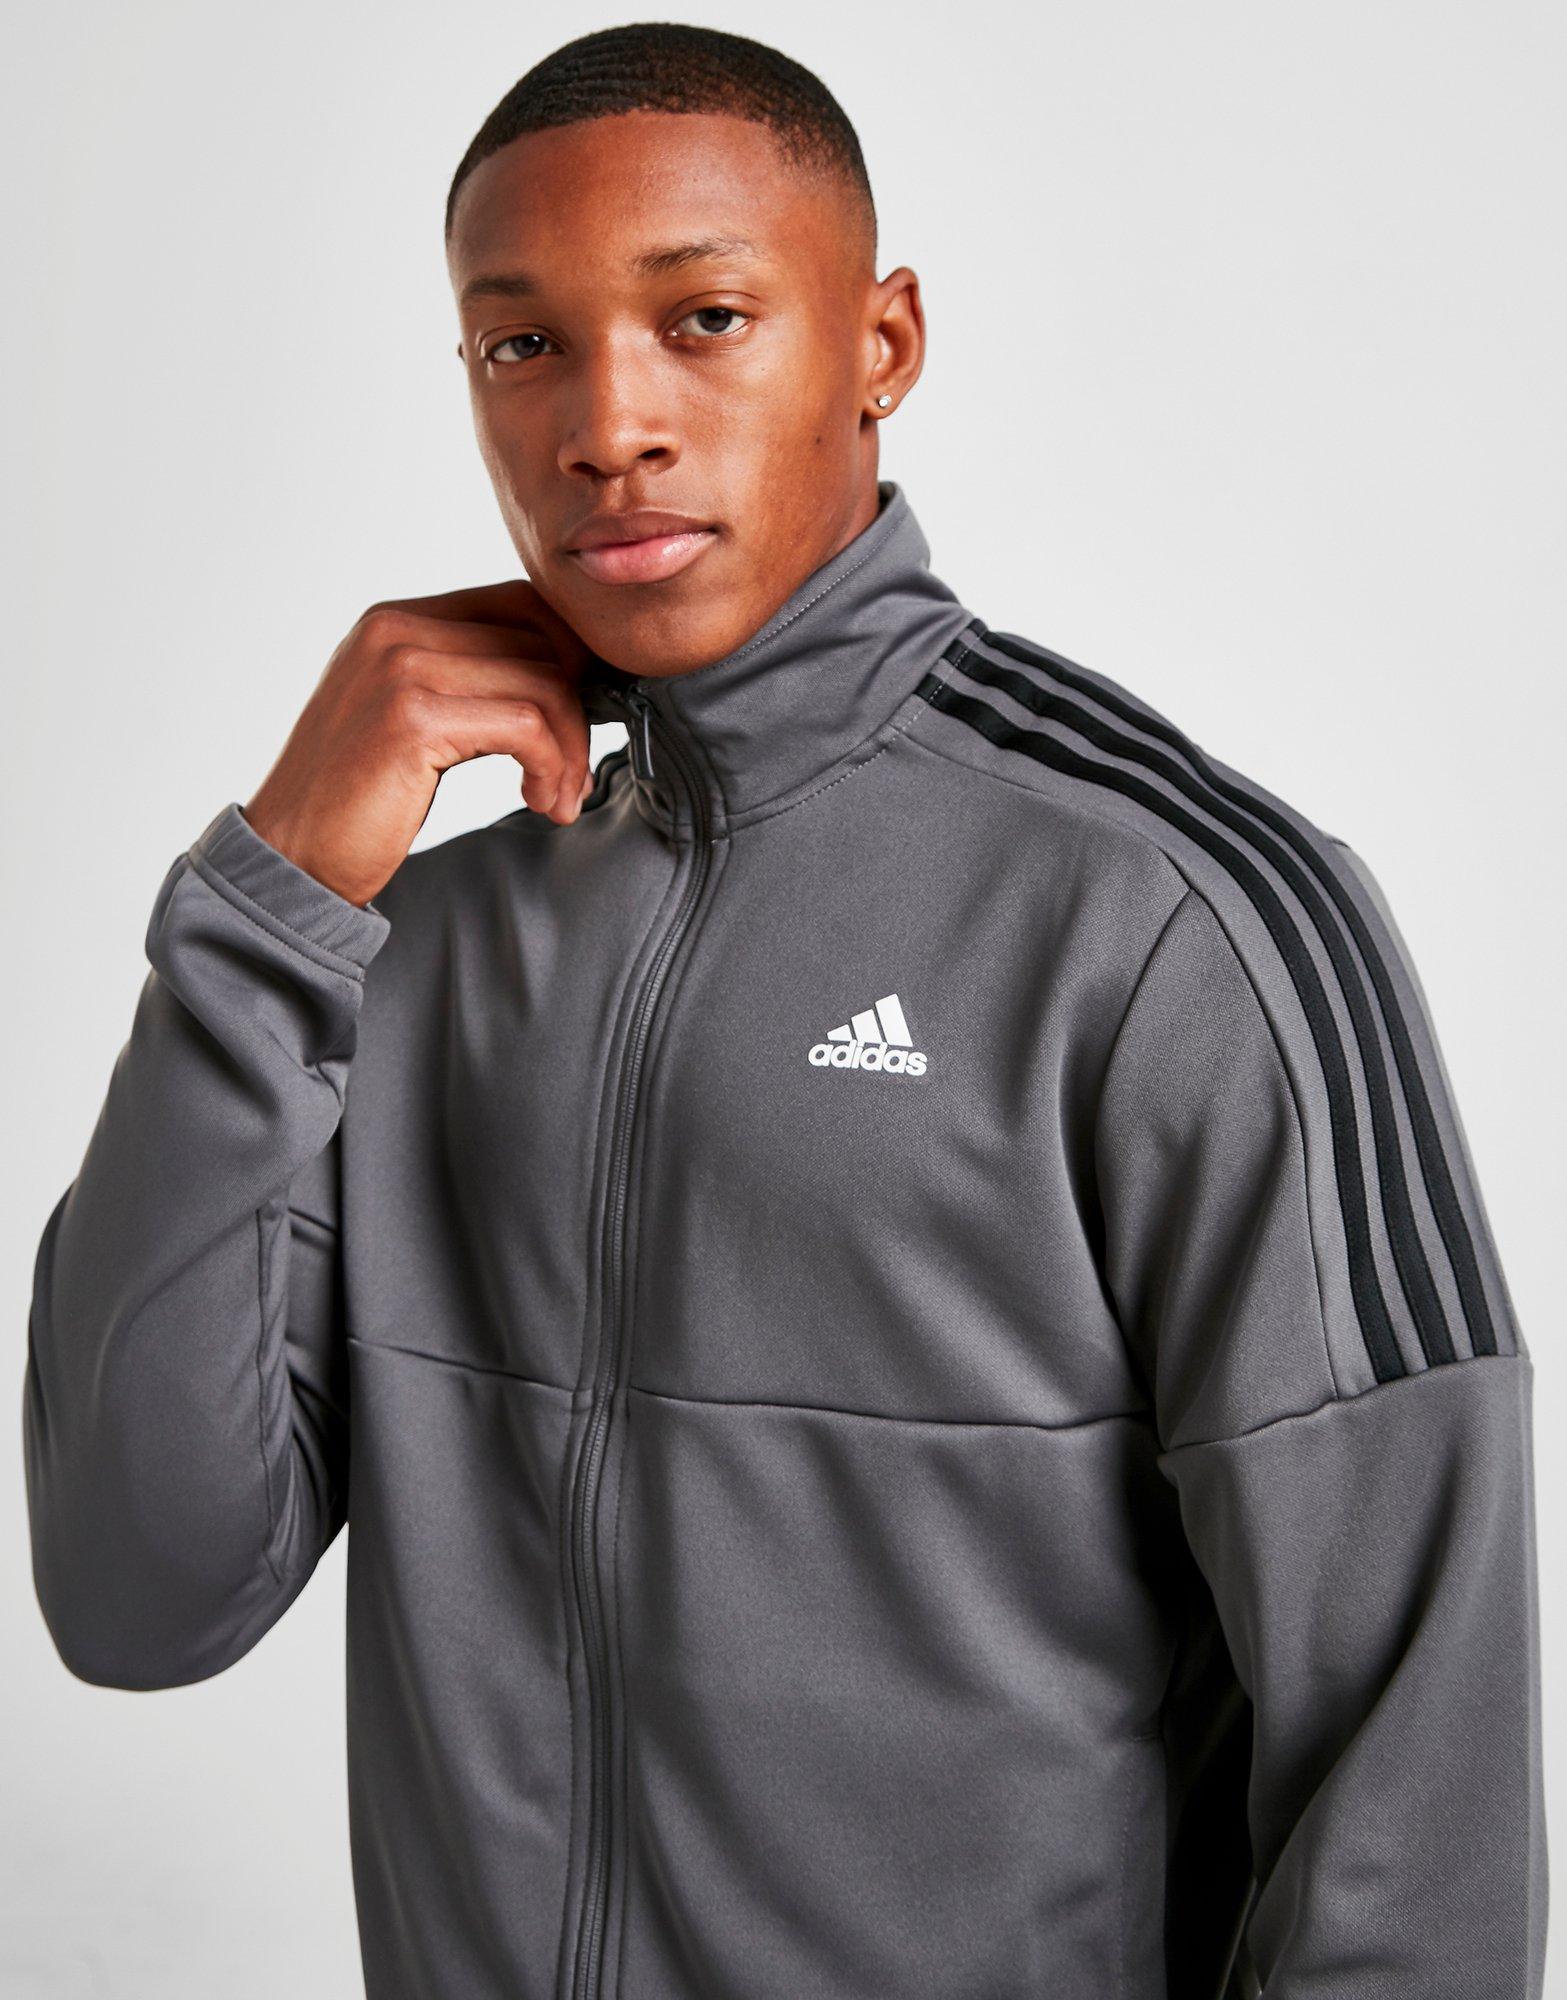 adidas 3-Stripes Poly Track Top